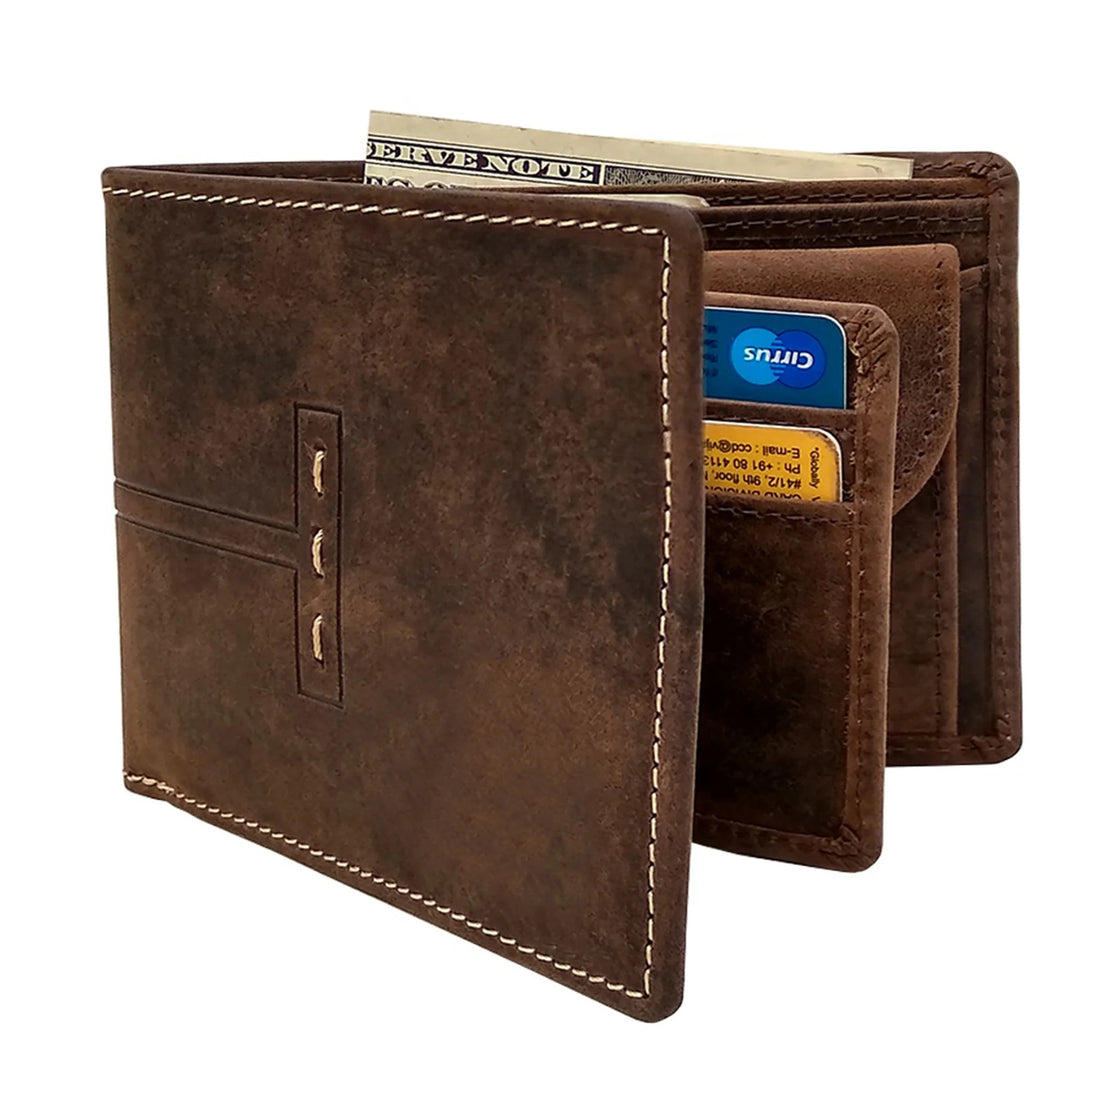 Exclusive 2 fold leather wallet for men with coin pocket